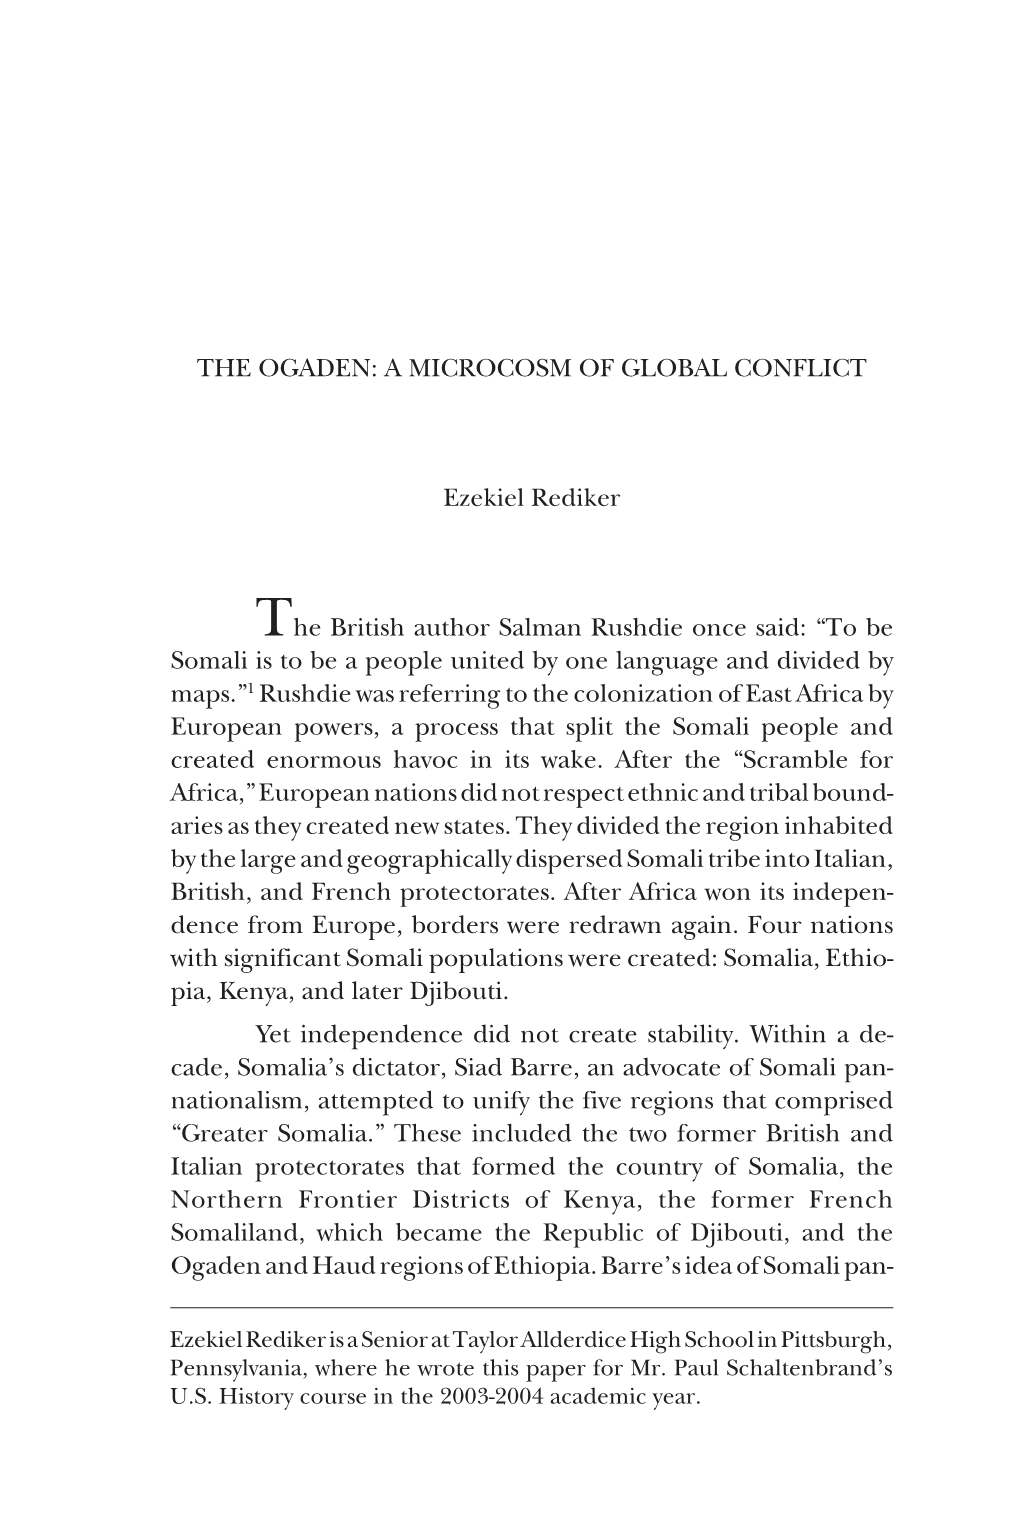 The Ogaden: a Microcosm of Global Conflict